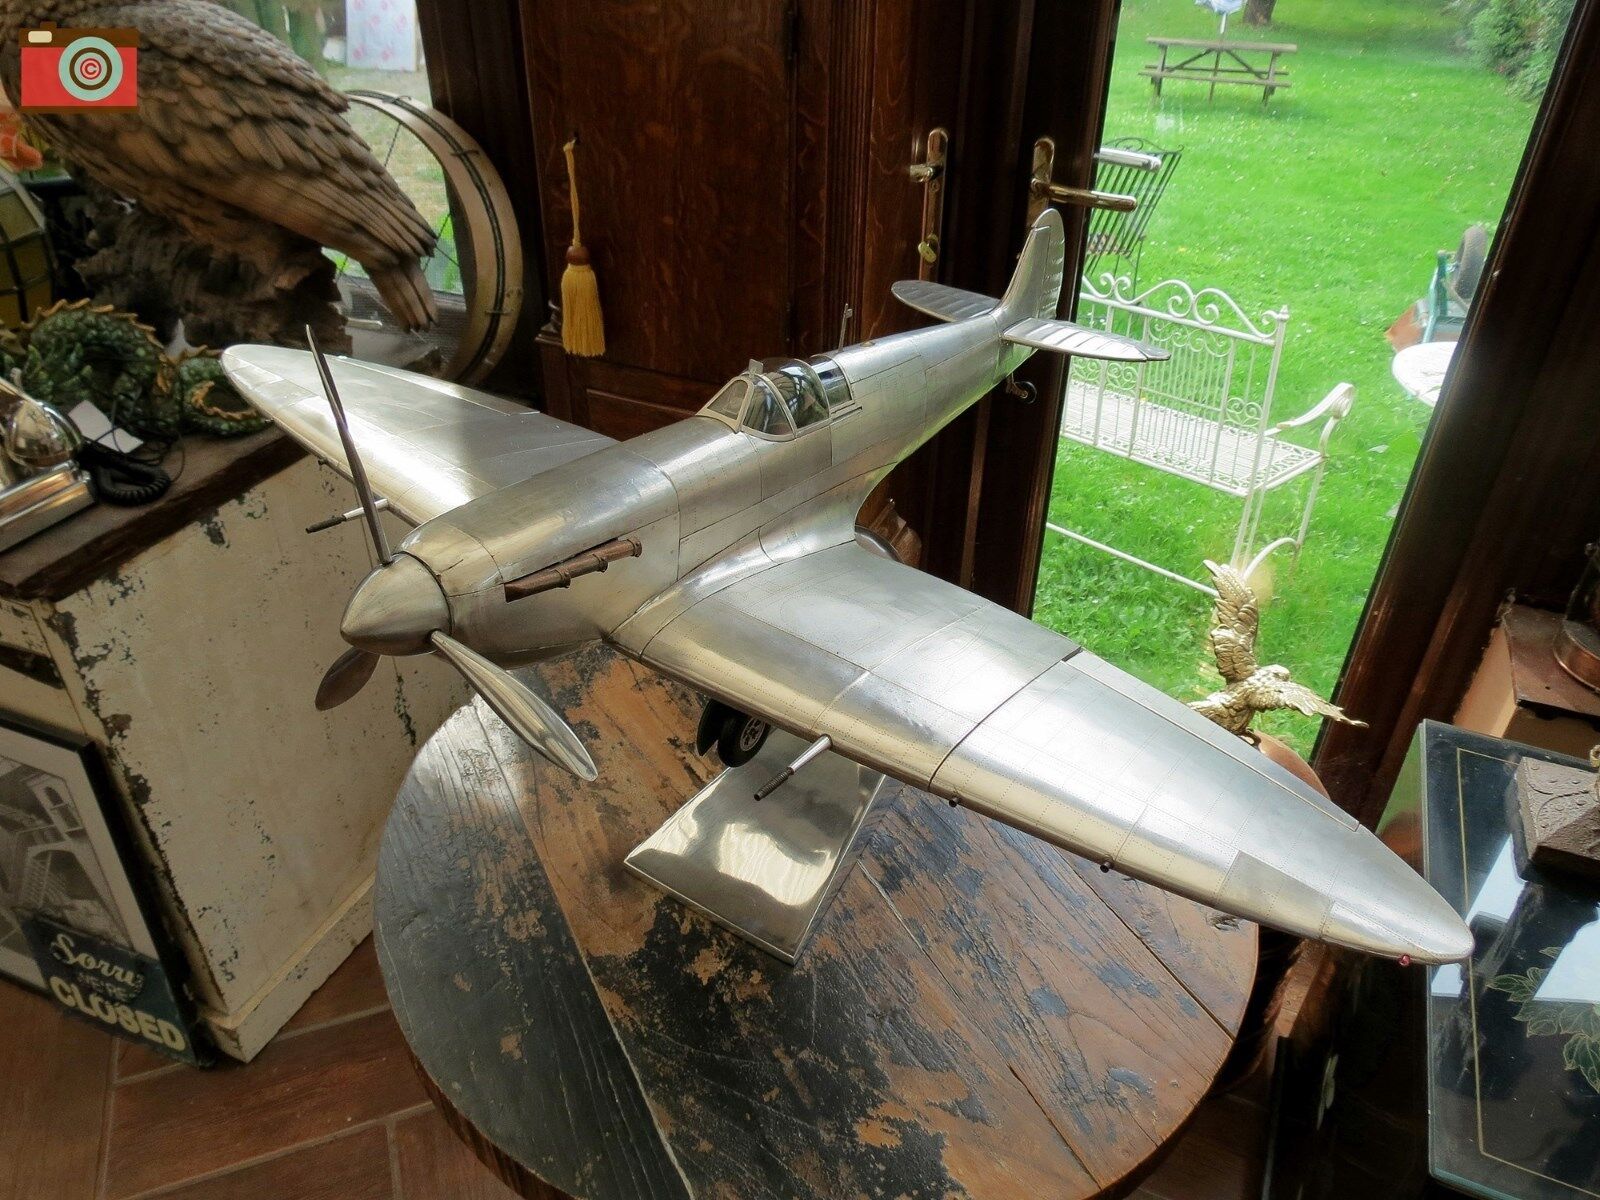 A WWII SPITFIRE MODEL. BEAUTIFUL REPLICA AIRCRAFT. AUTHENTIC MODELS. INCREDIBLE